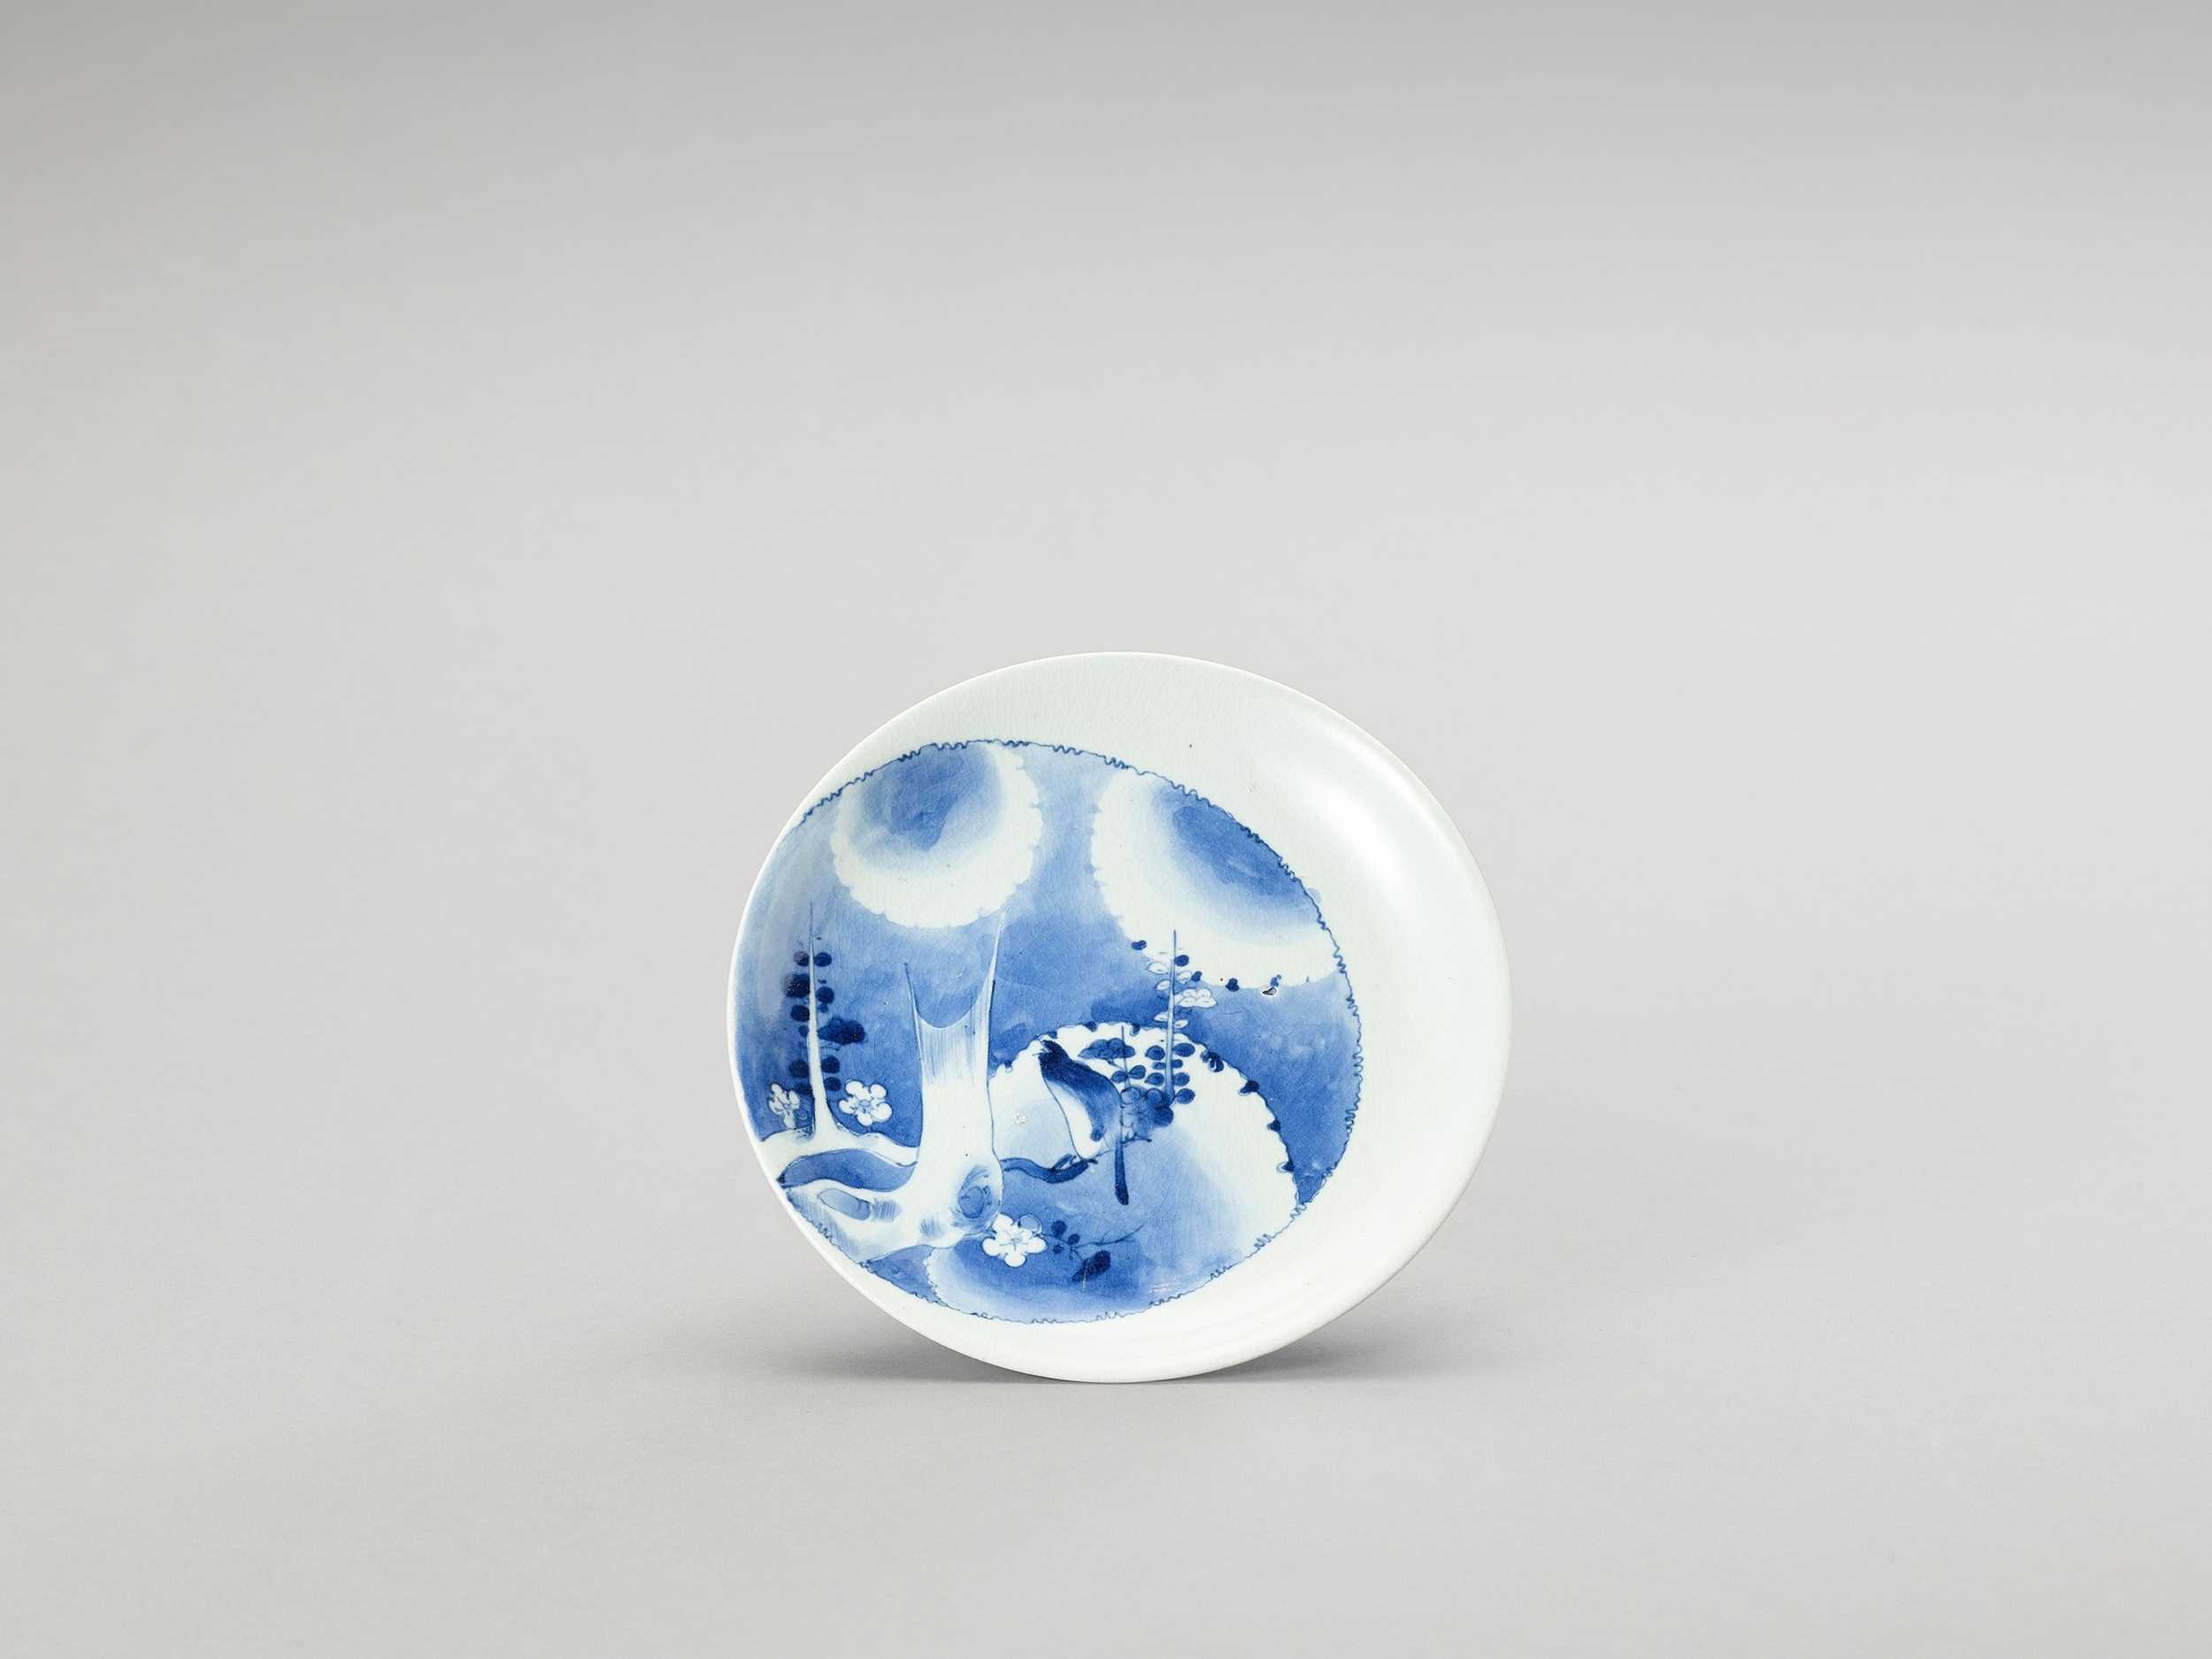 Lot 1018 - A BLUE AND WHITE PORCELAIN DISH